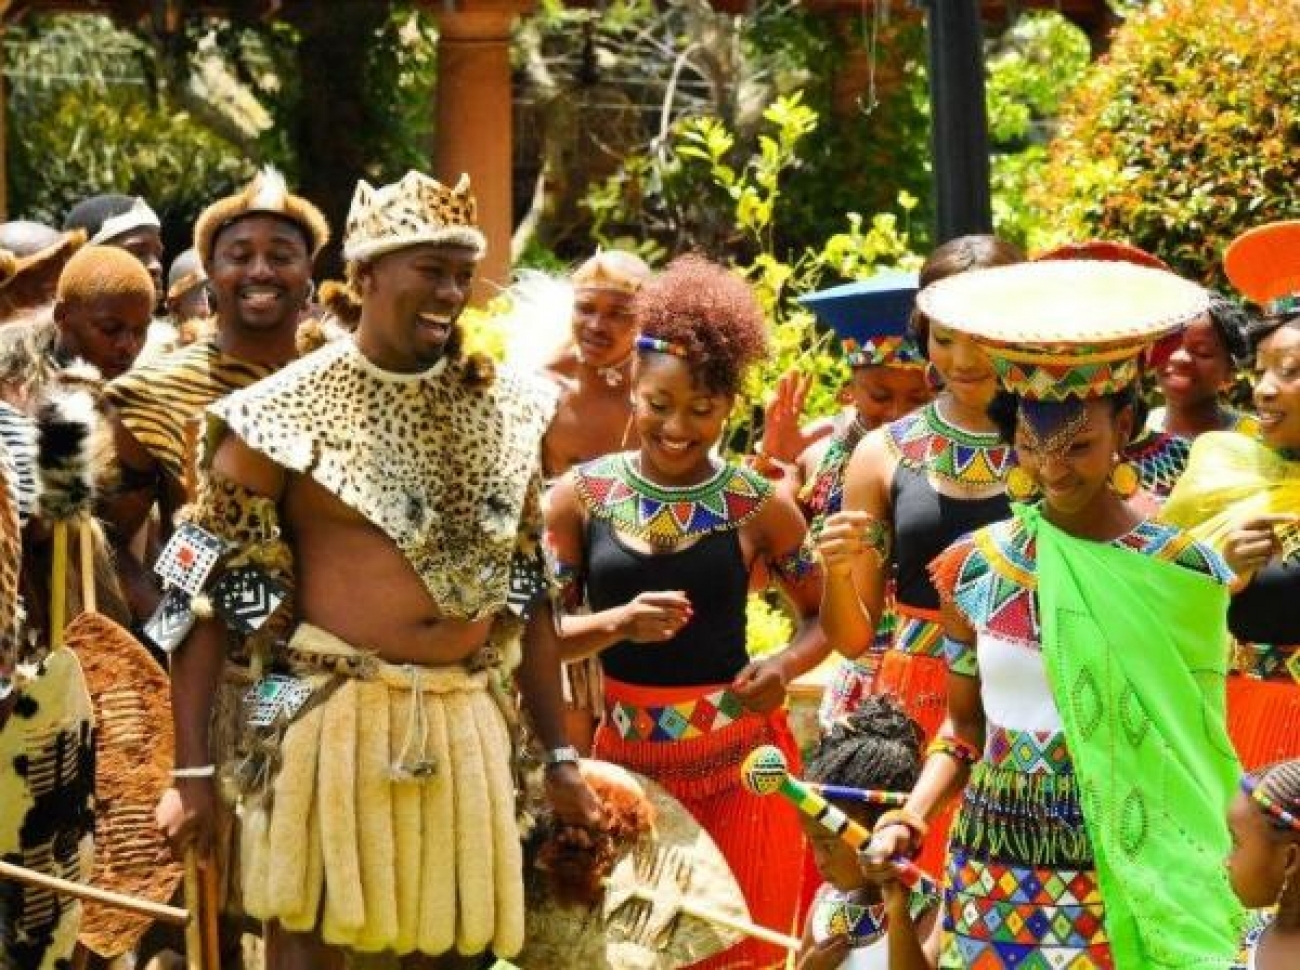 A group of people in traditional Zulu cultural attire laugh and dance against a green leafy background.